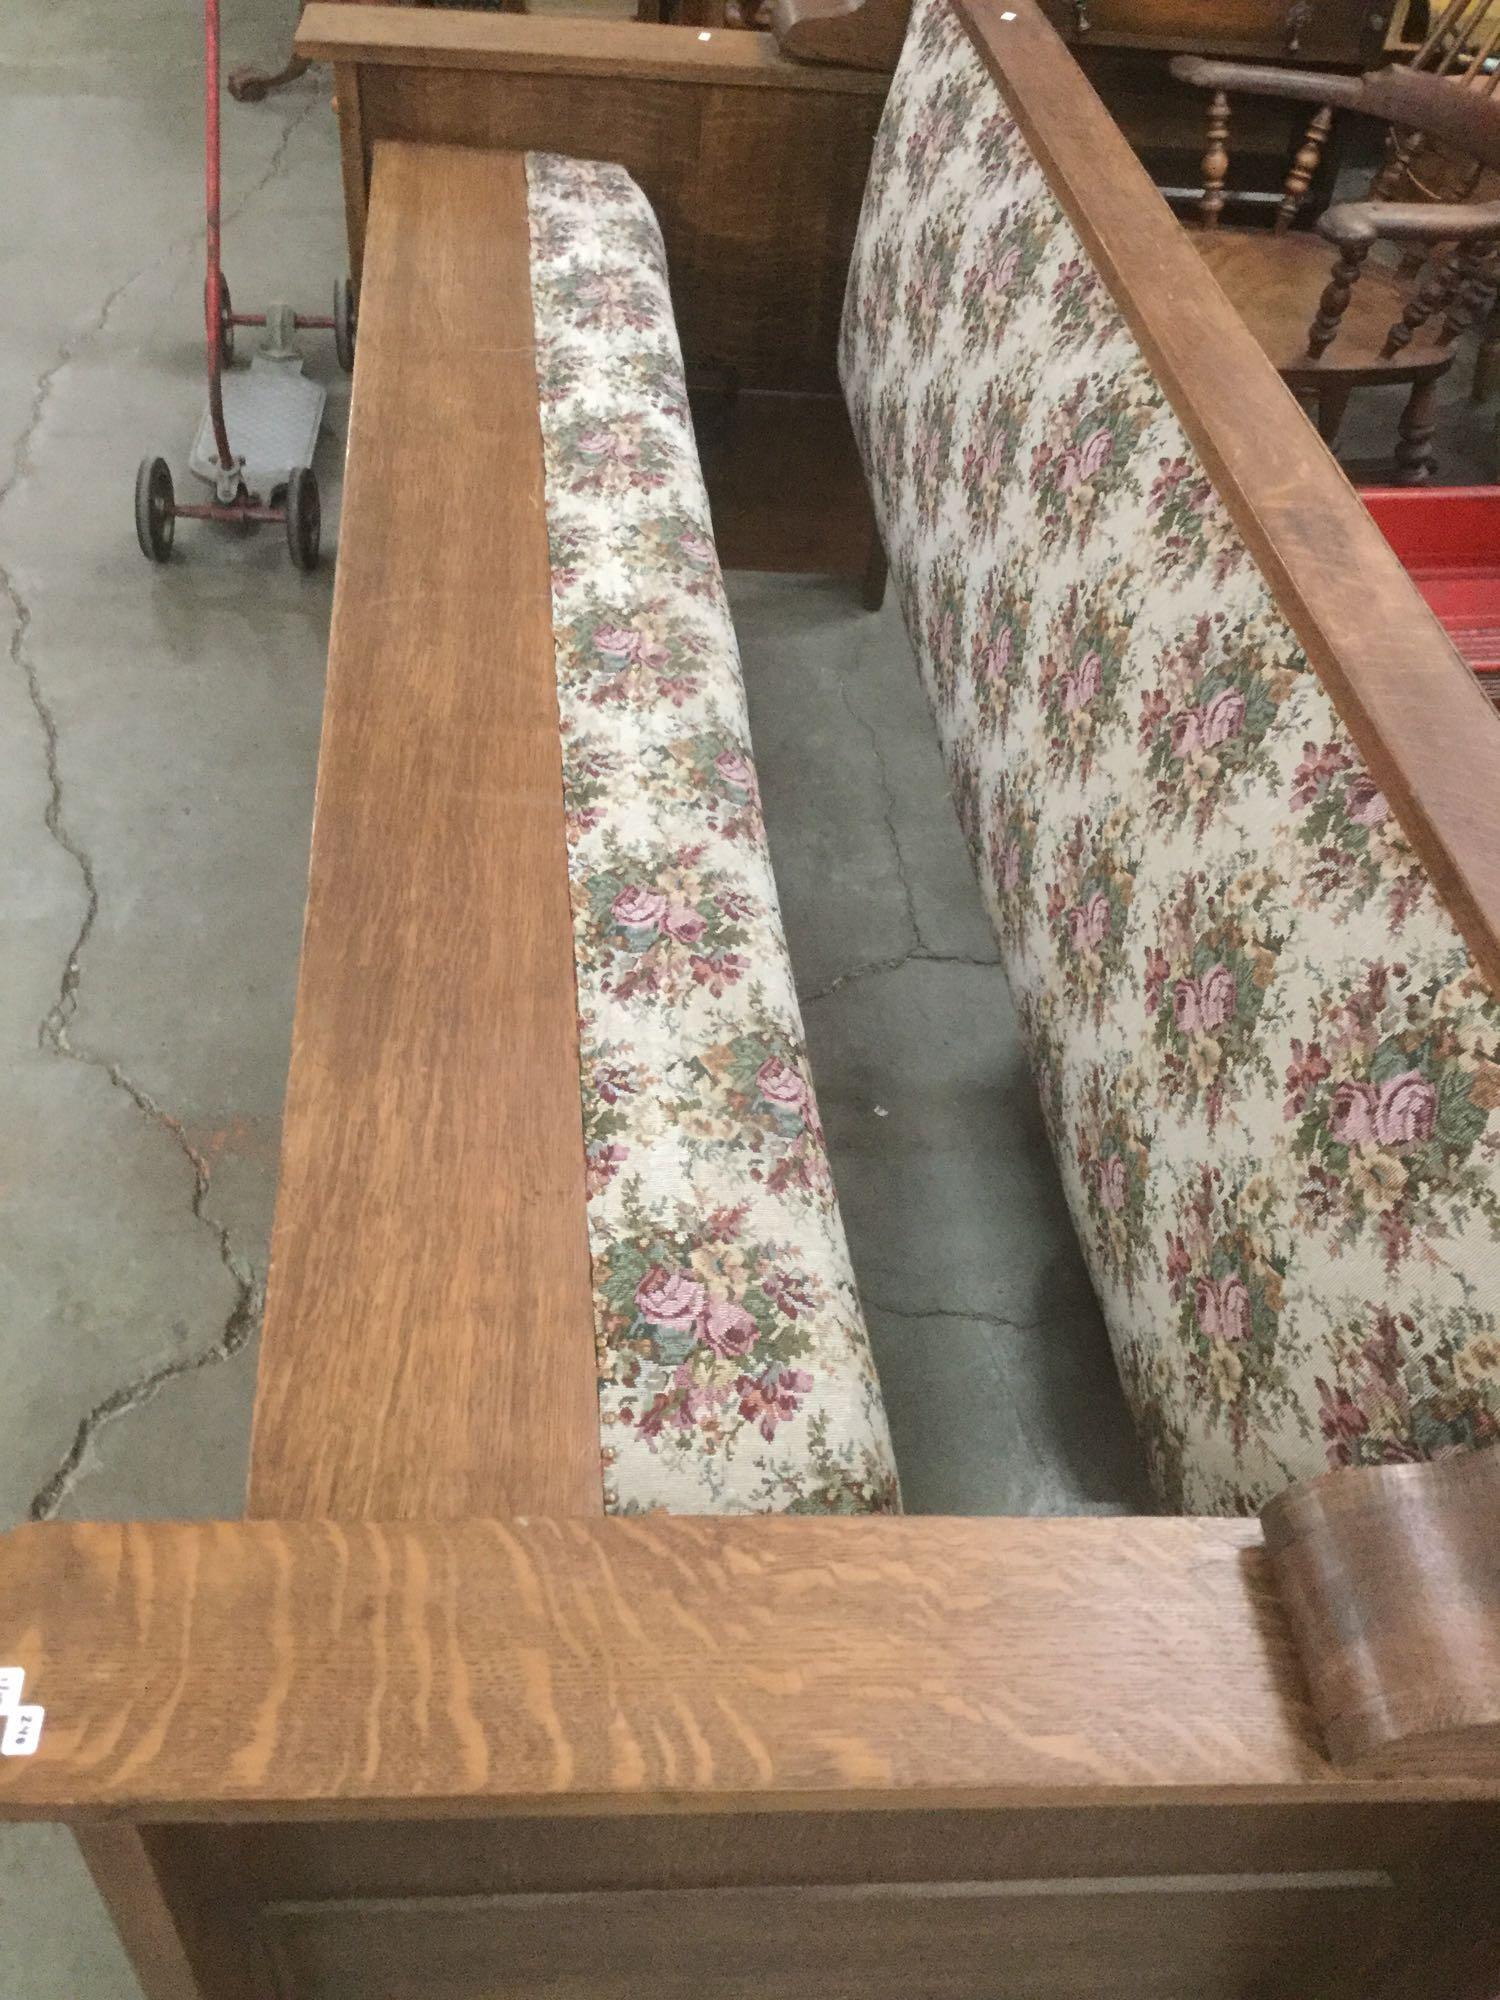 Antique thick oak mission style frame sofa couch / hide a bed with flower upholstery - as is